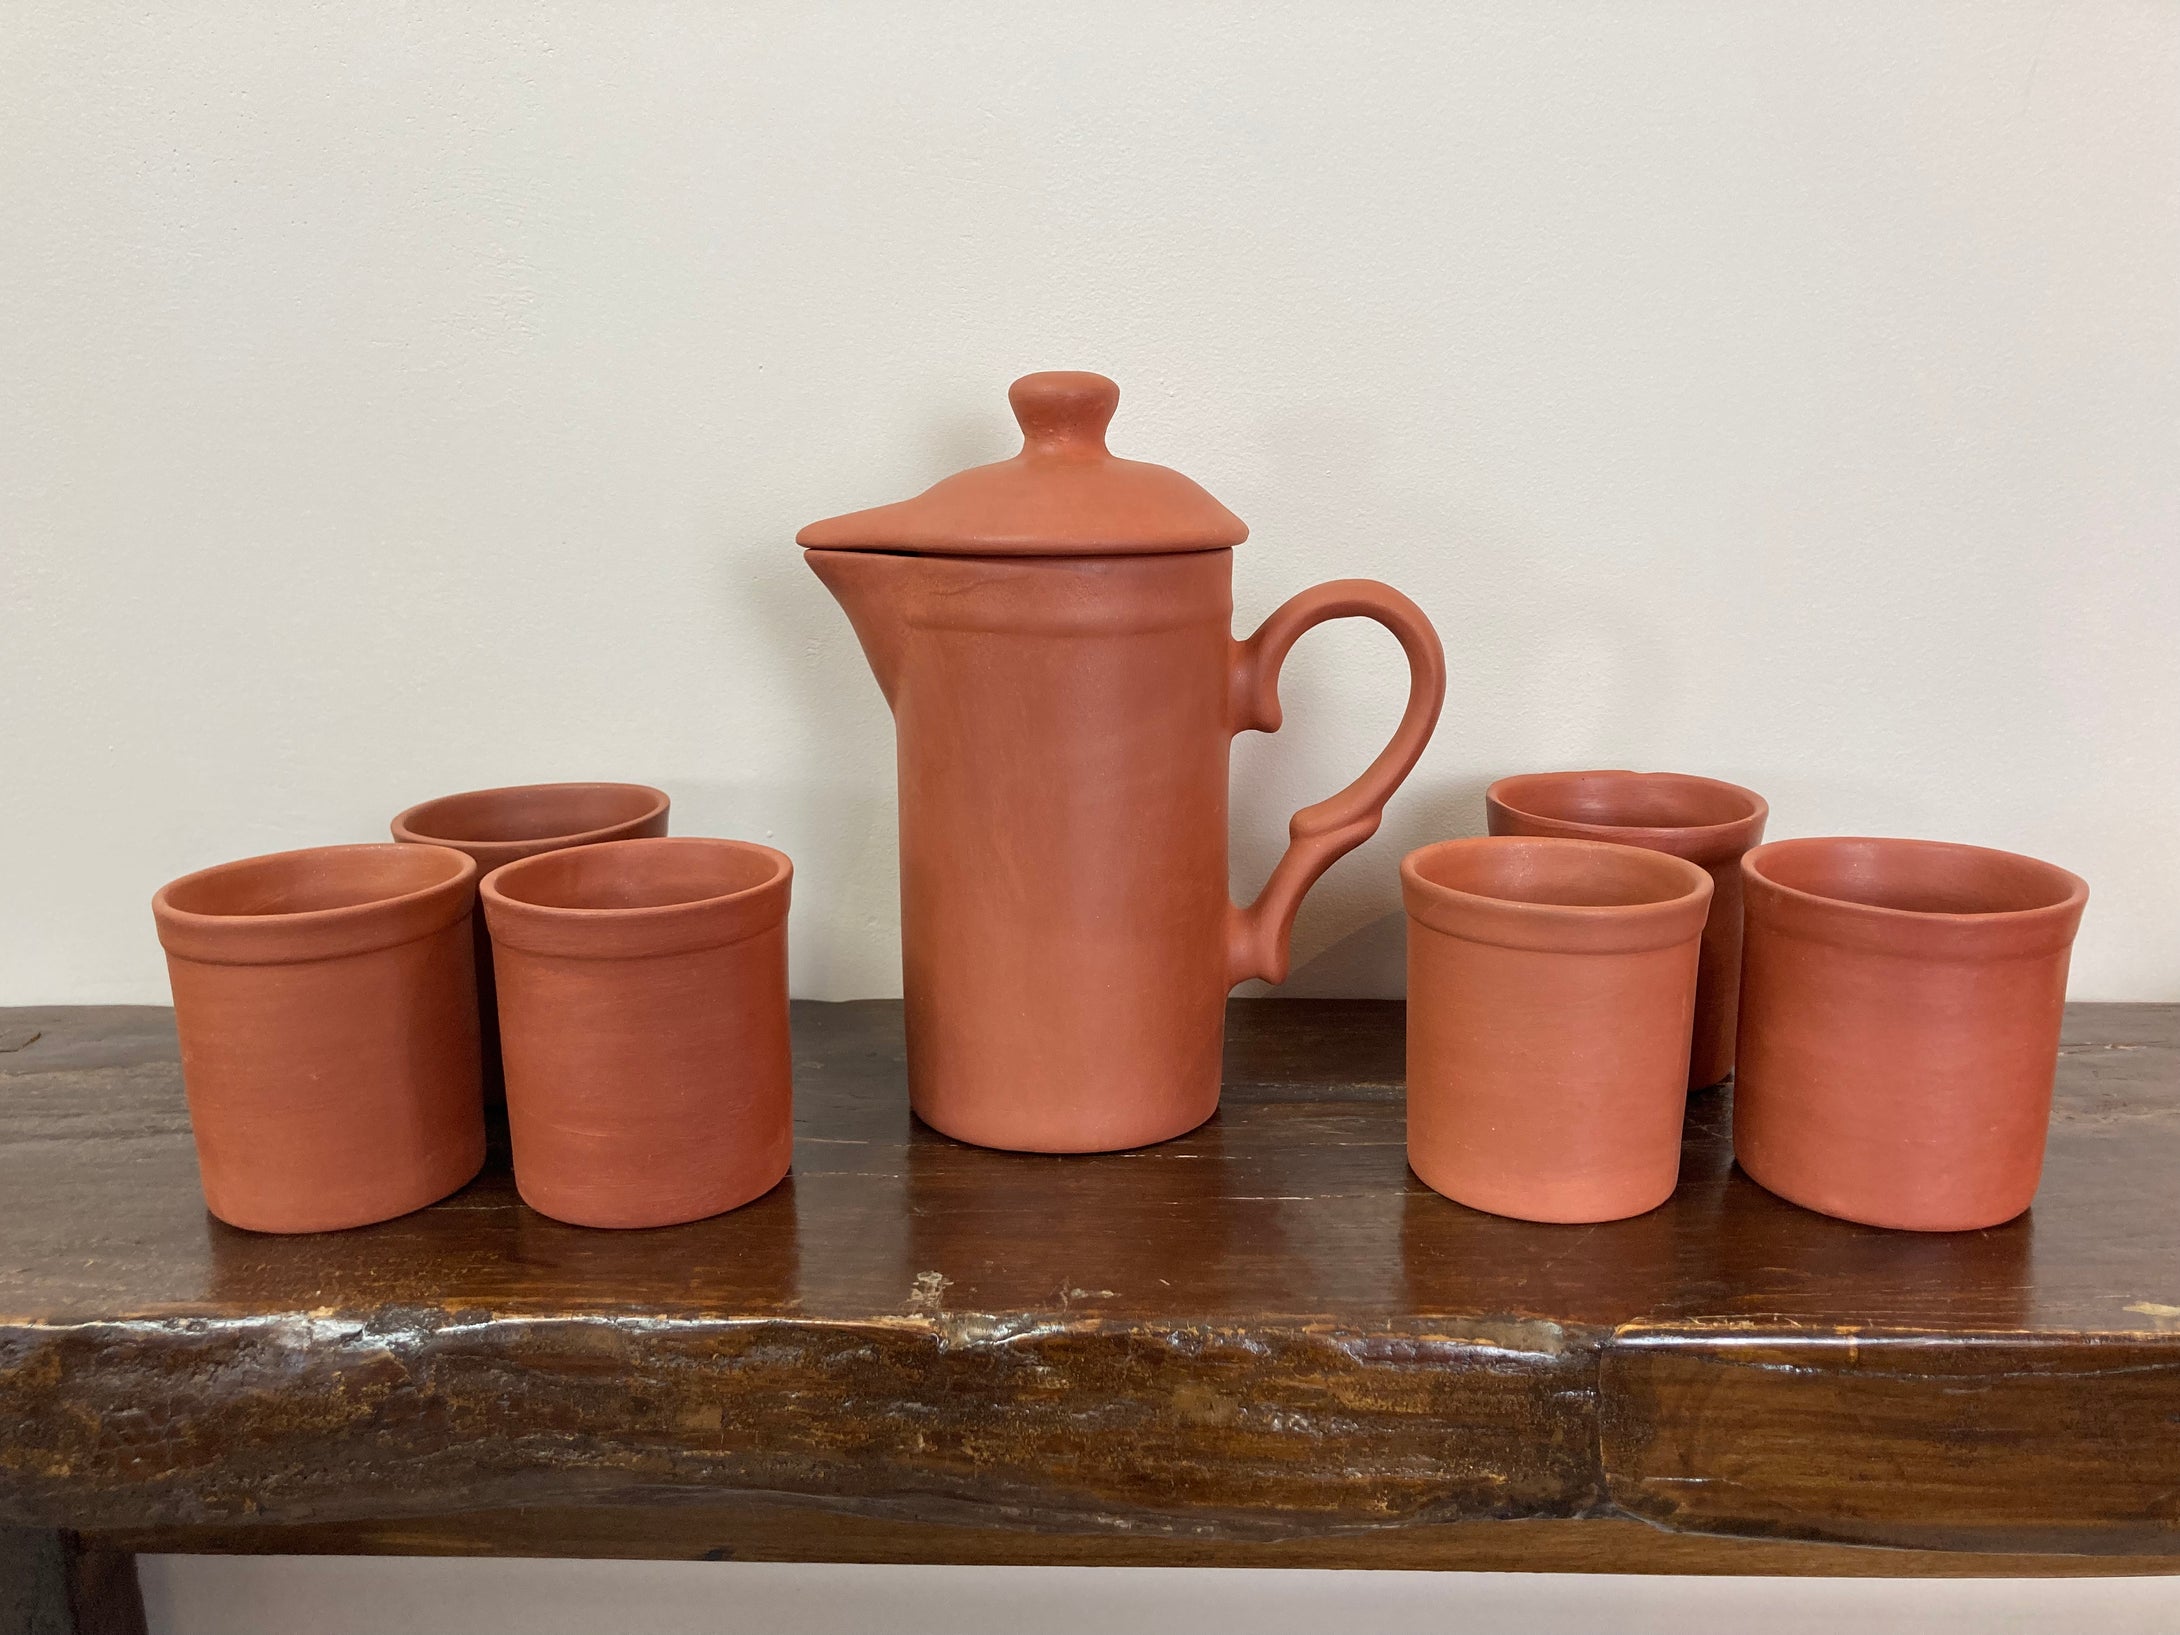 Pitcher with Clay Cups.  1 jug / s6 cups